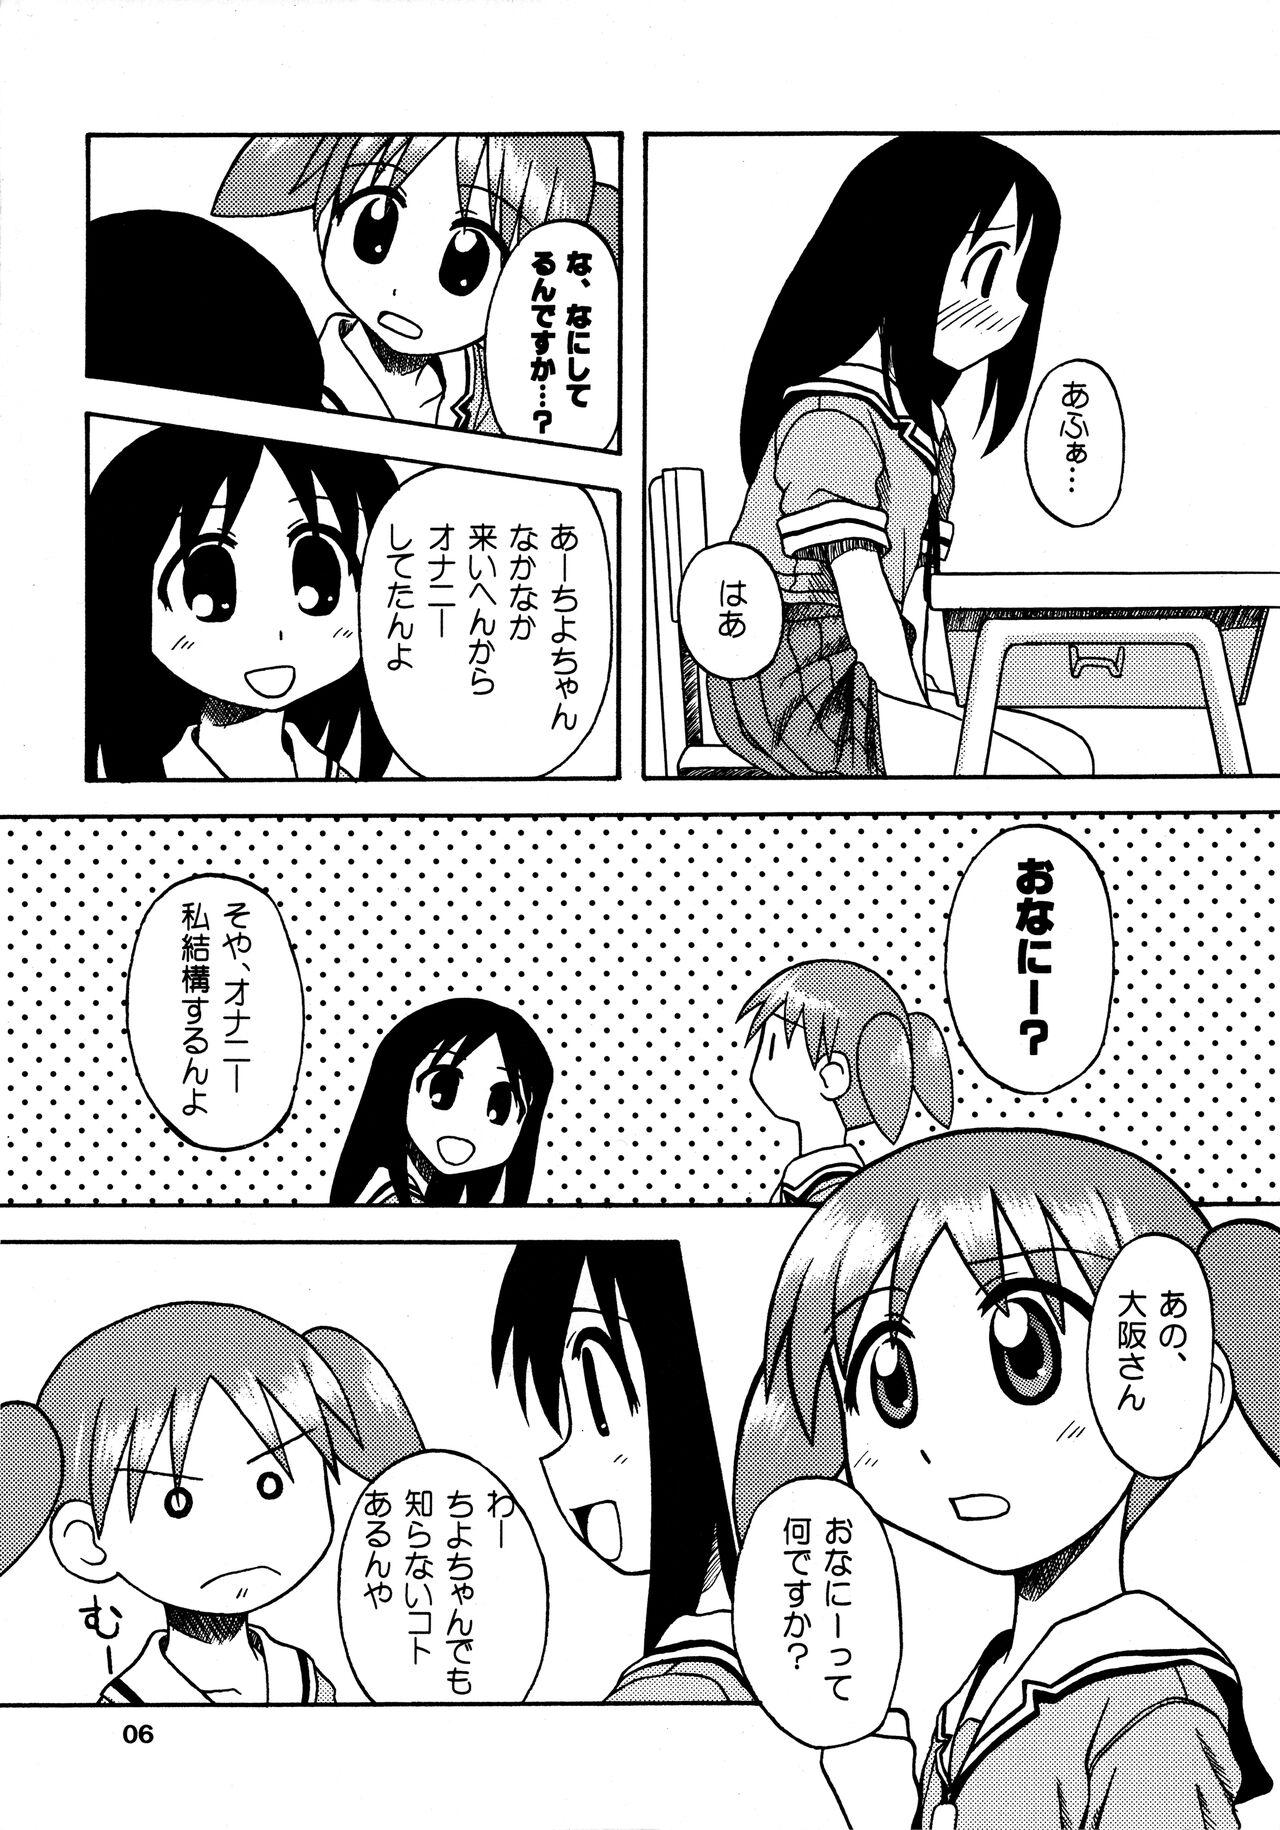 Hood ANOTHER LIFE - Azumanga daioh Pack - Page 6